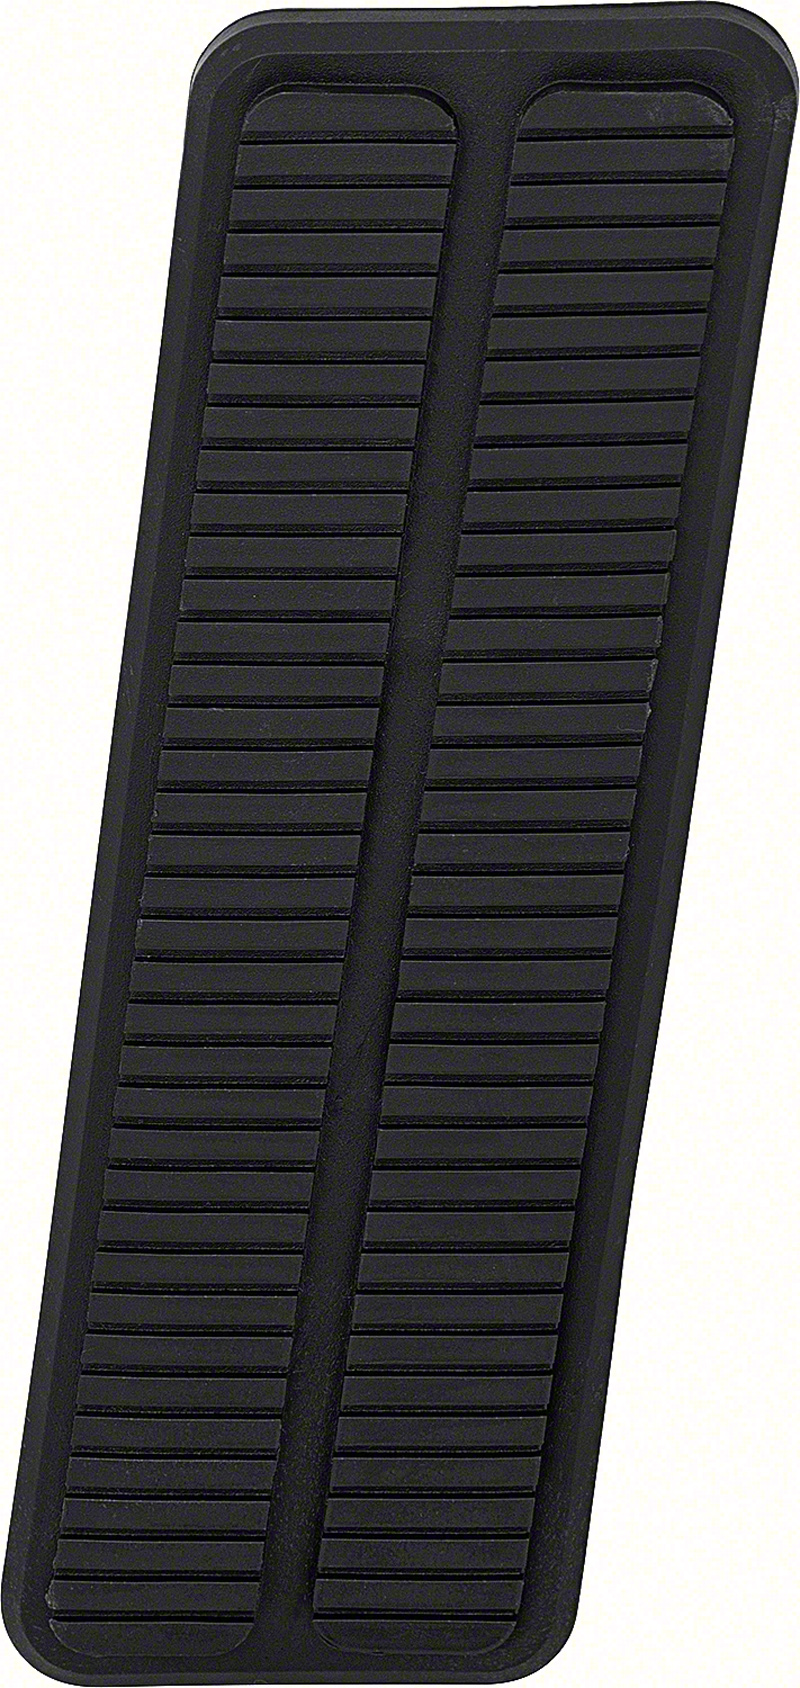 1967-81, 97-2004 Injection Molded ABS Standard Accelerator Pedal Pad 